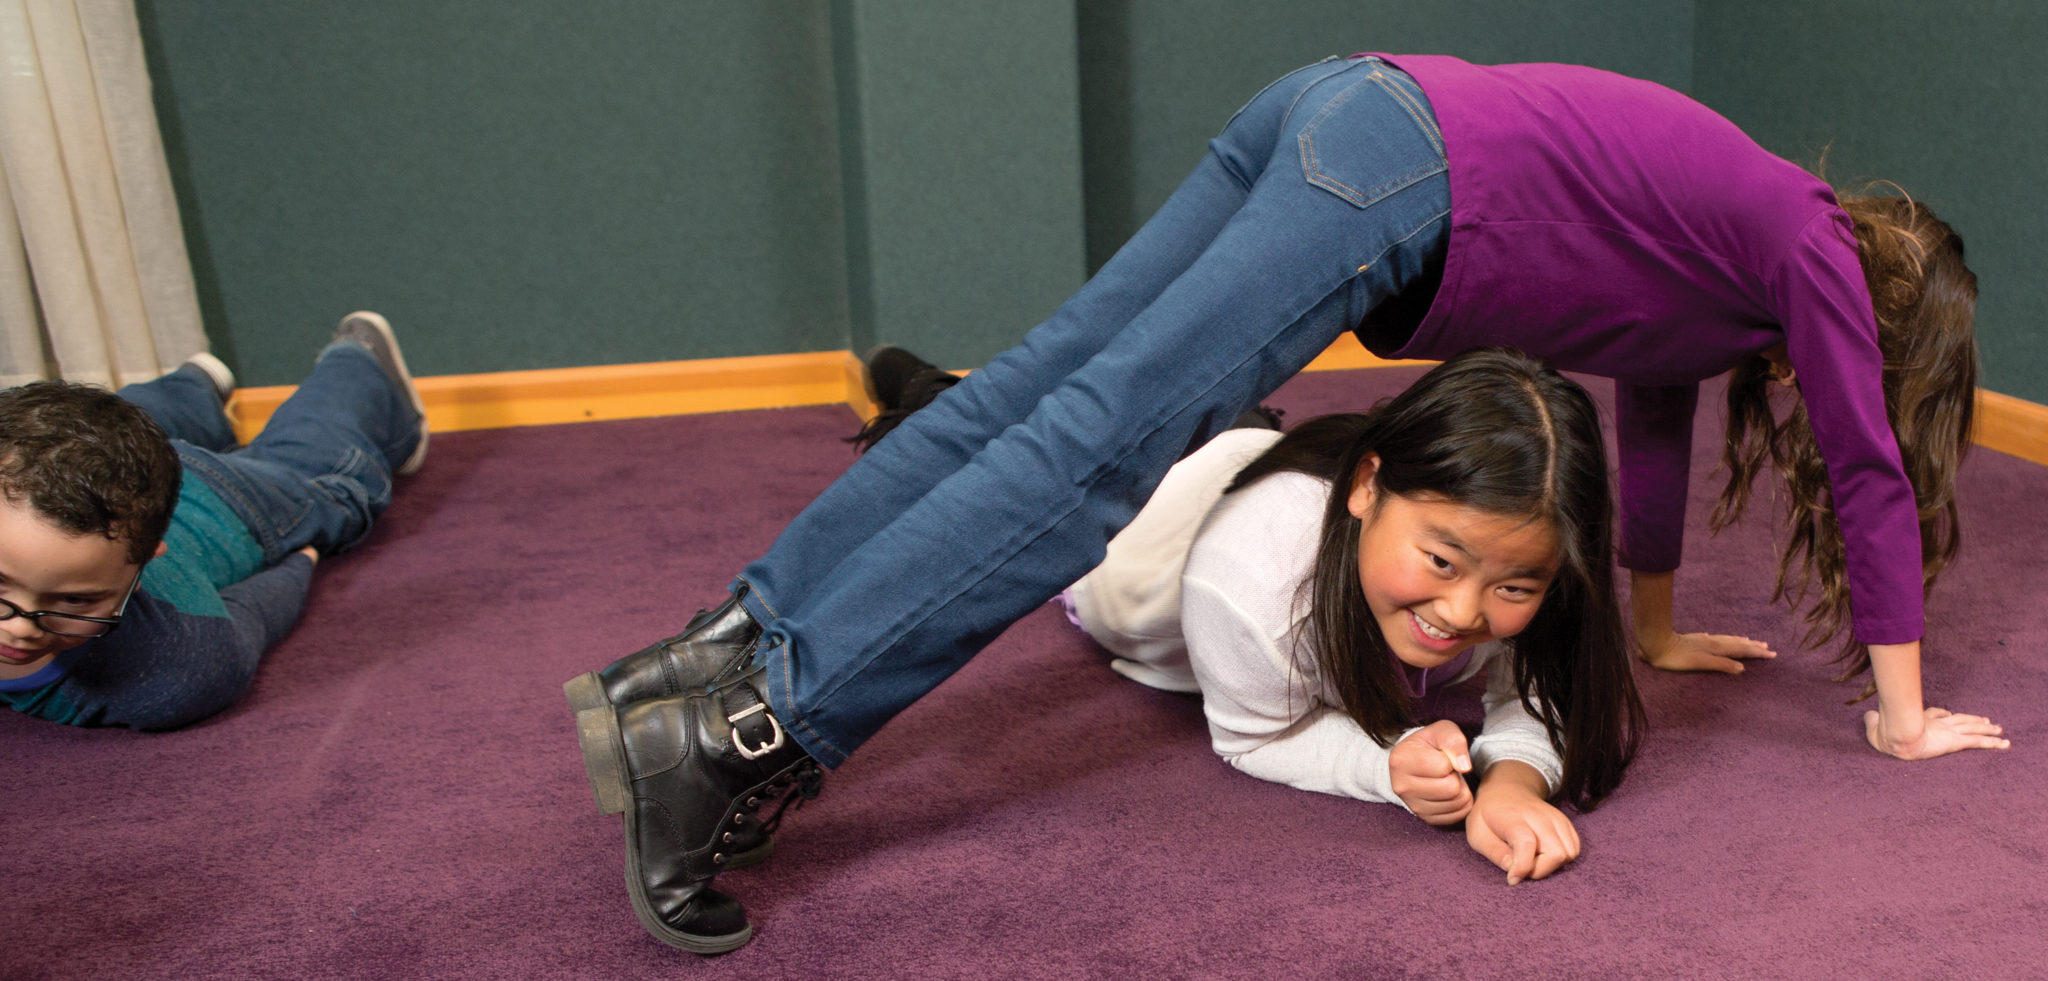 A girl crawls under another girl who is making a body out of body.